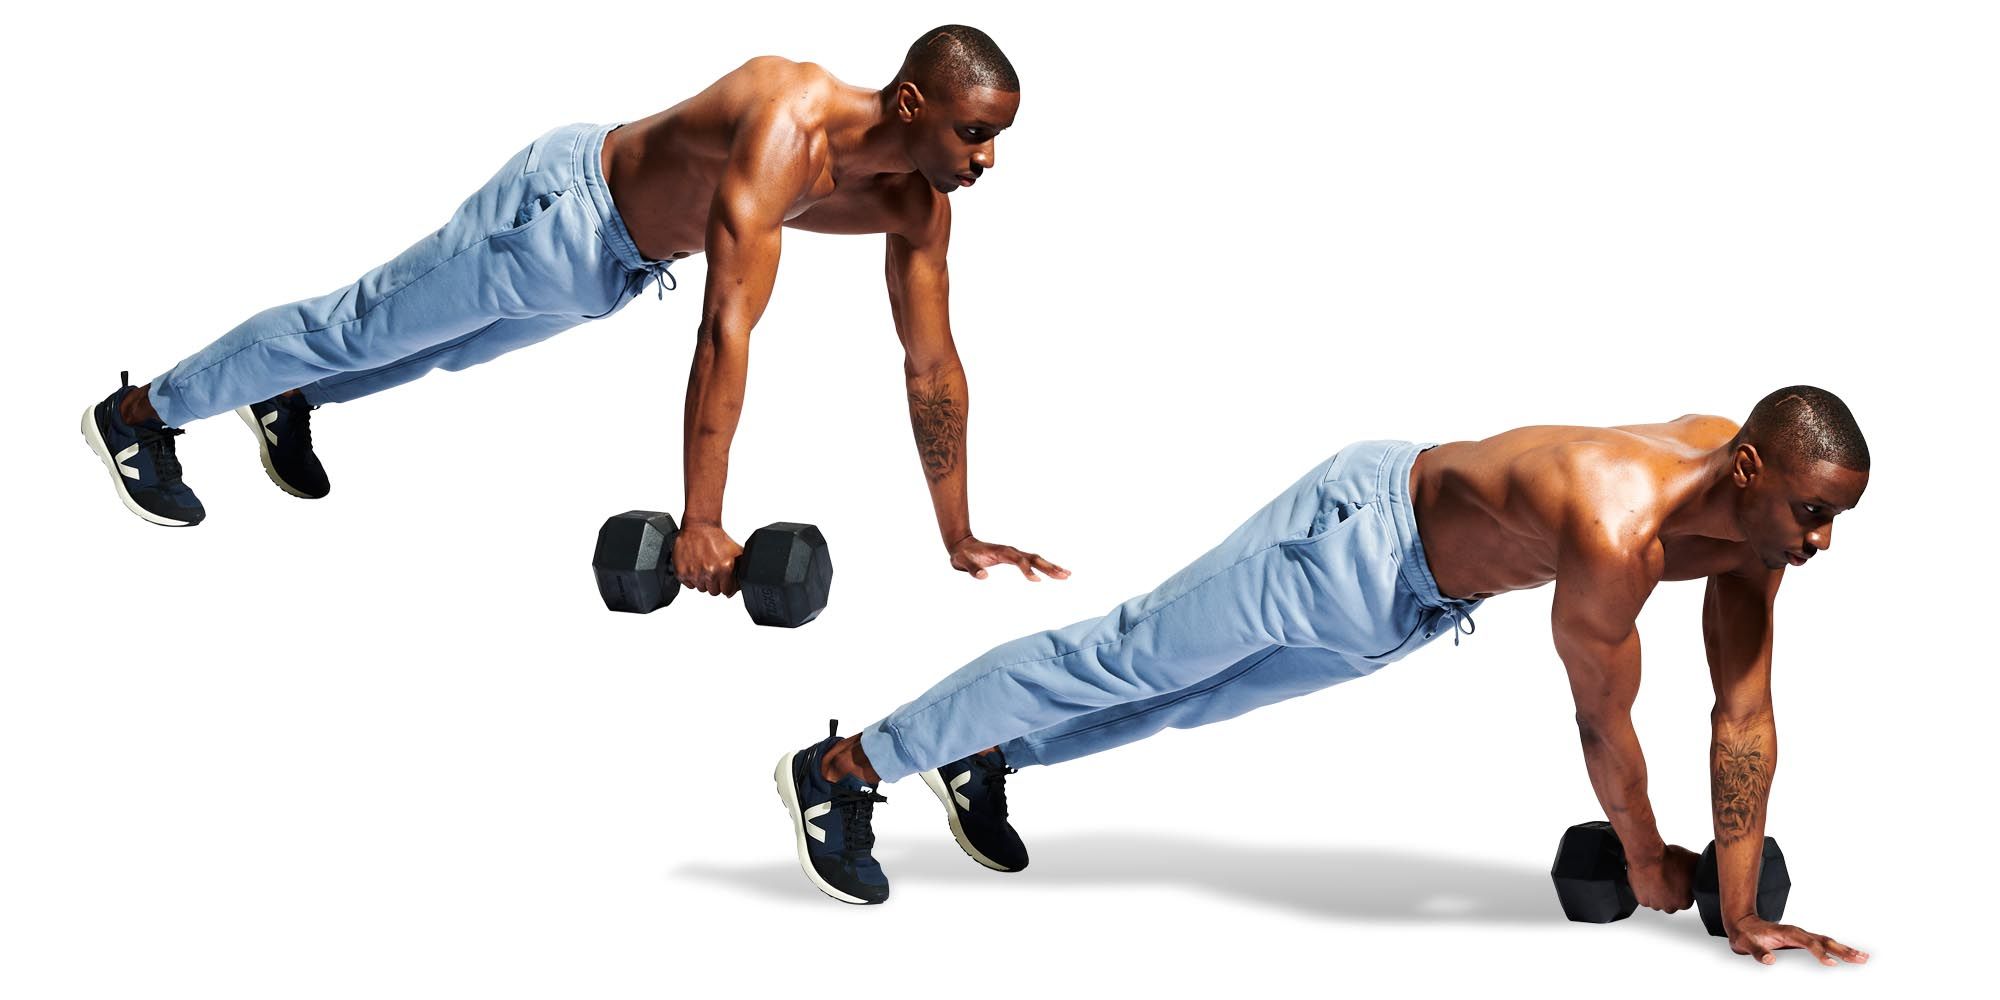 17 Best Exercises Trainers Swear By - Top Moves for a Toned Core,  Stability, and Strength